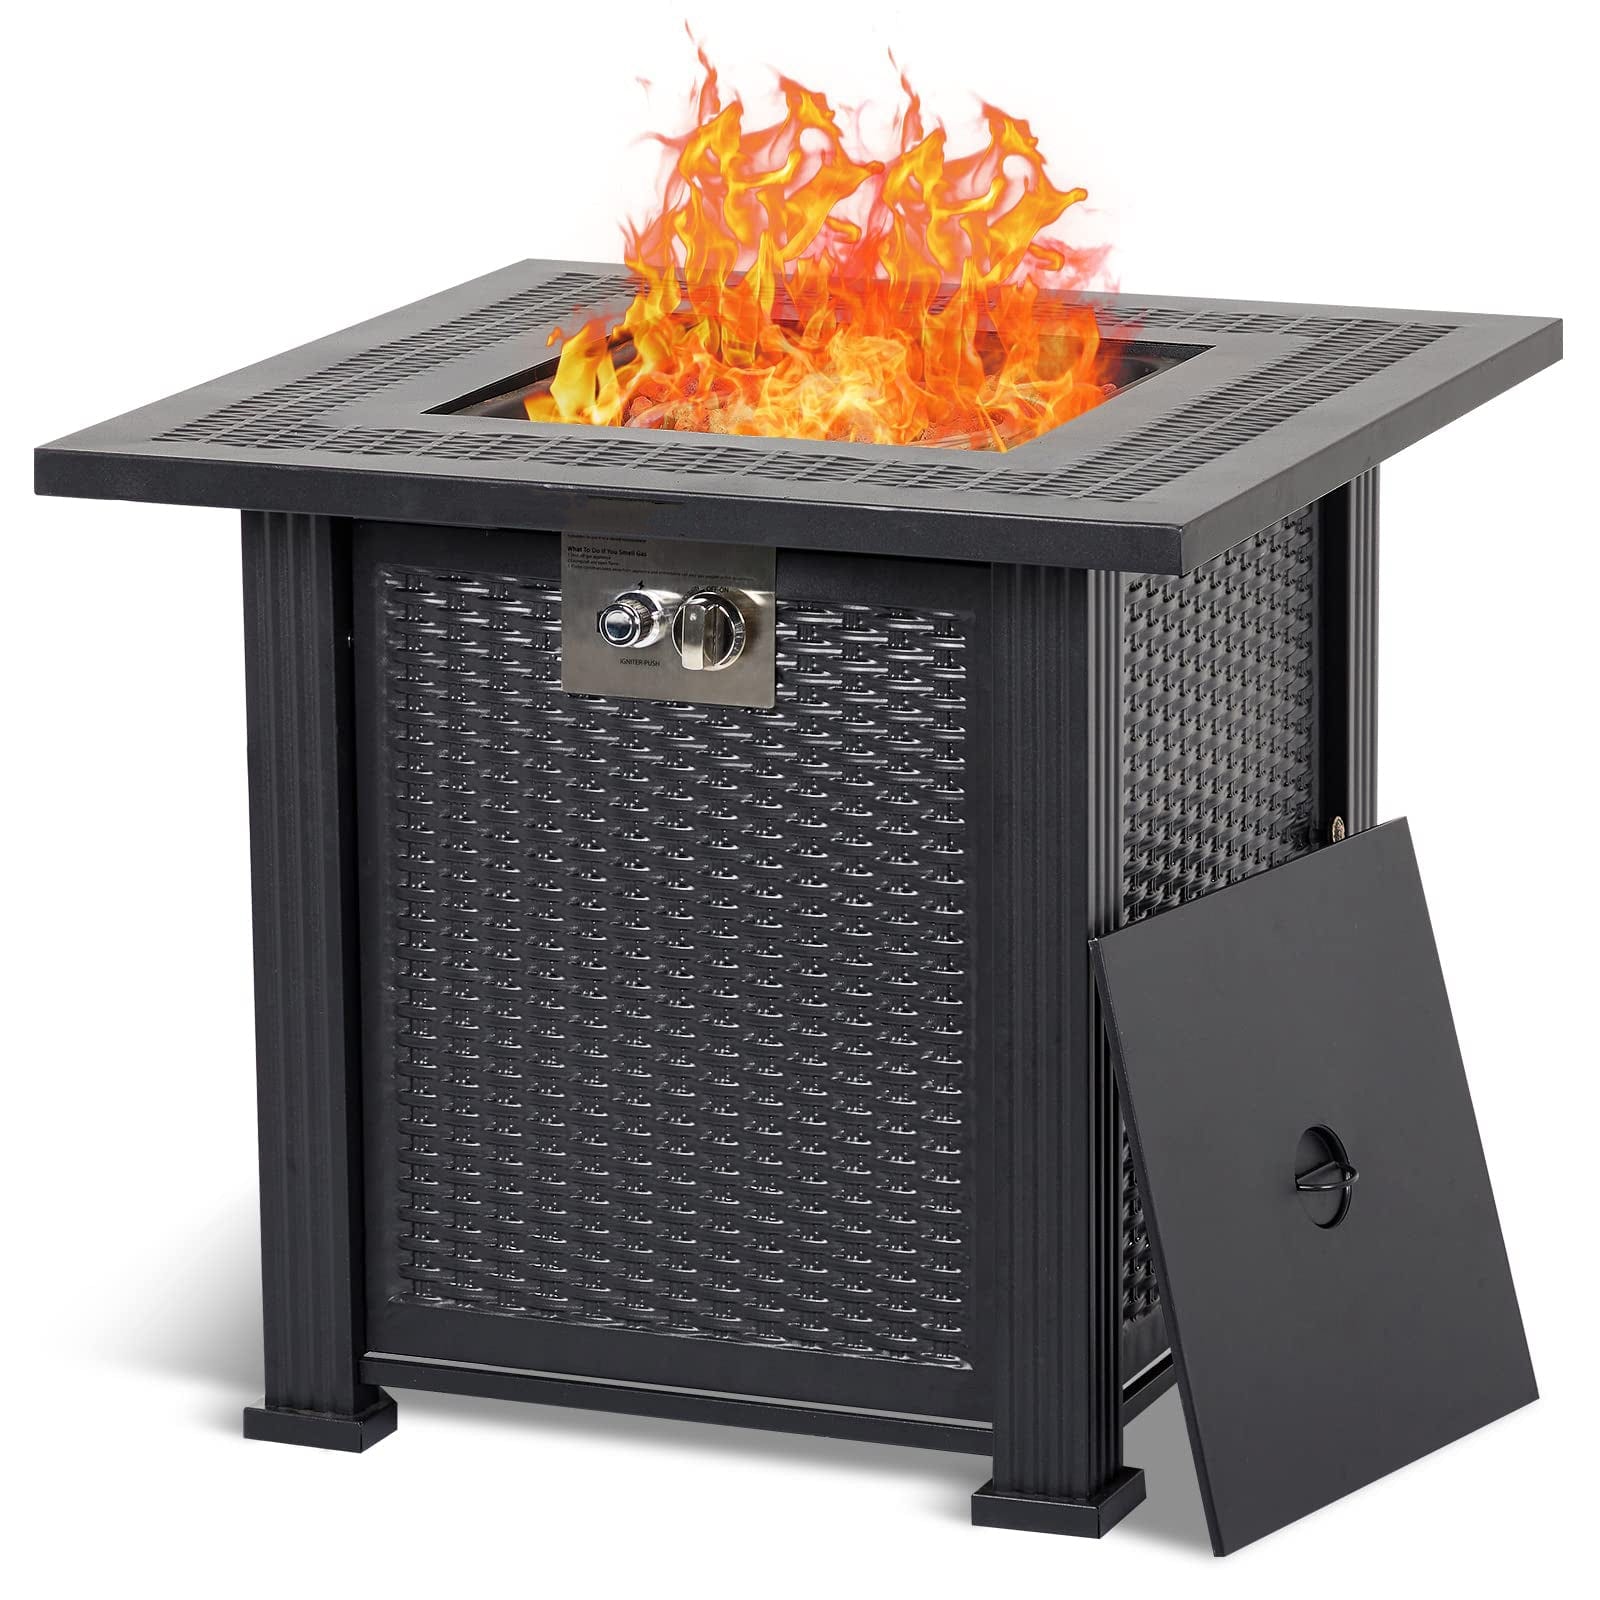 GARVEE 28 Inch Propane Fire Pit Table 50000BTU Rectangle Fire Table With Cover